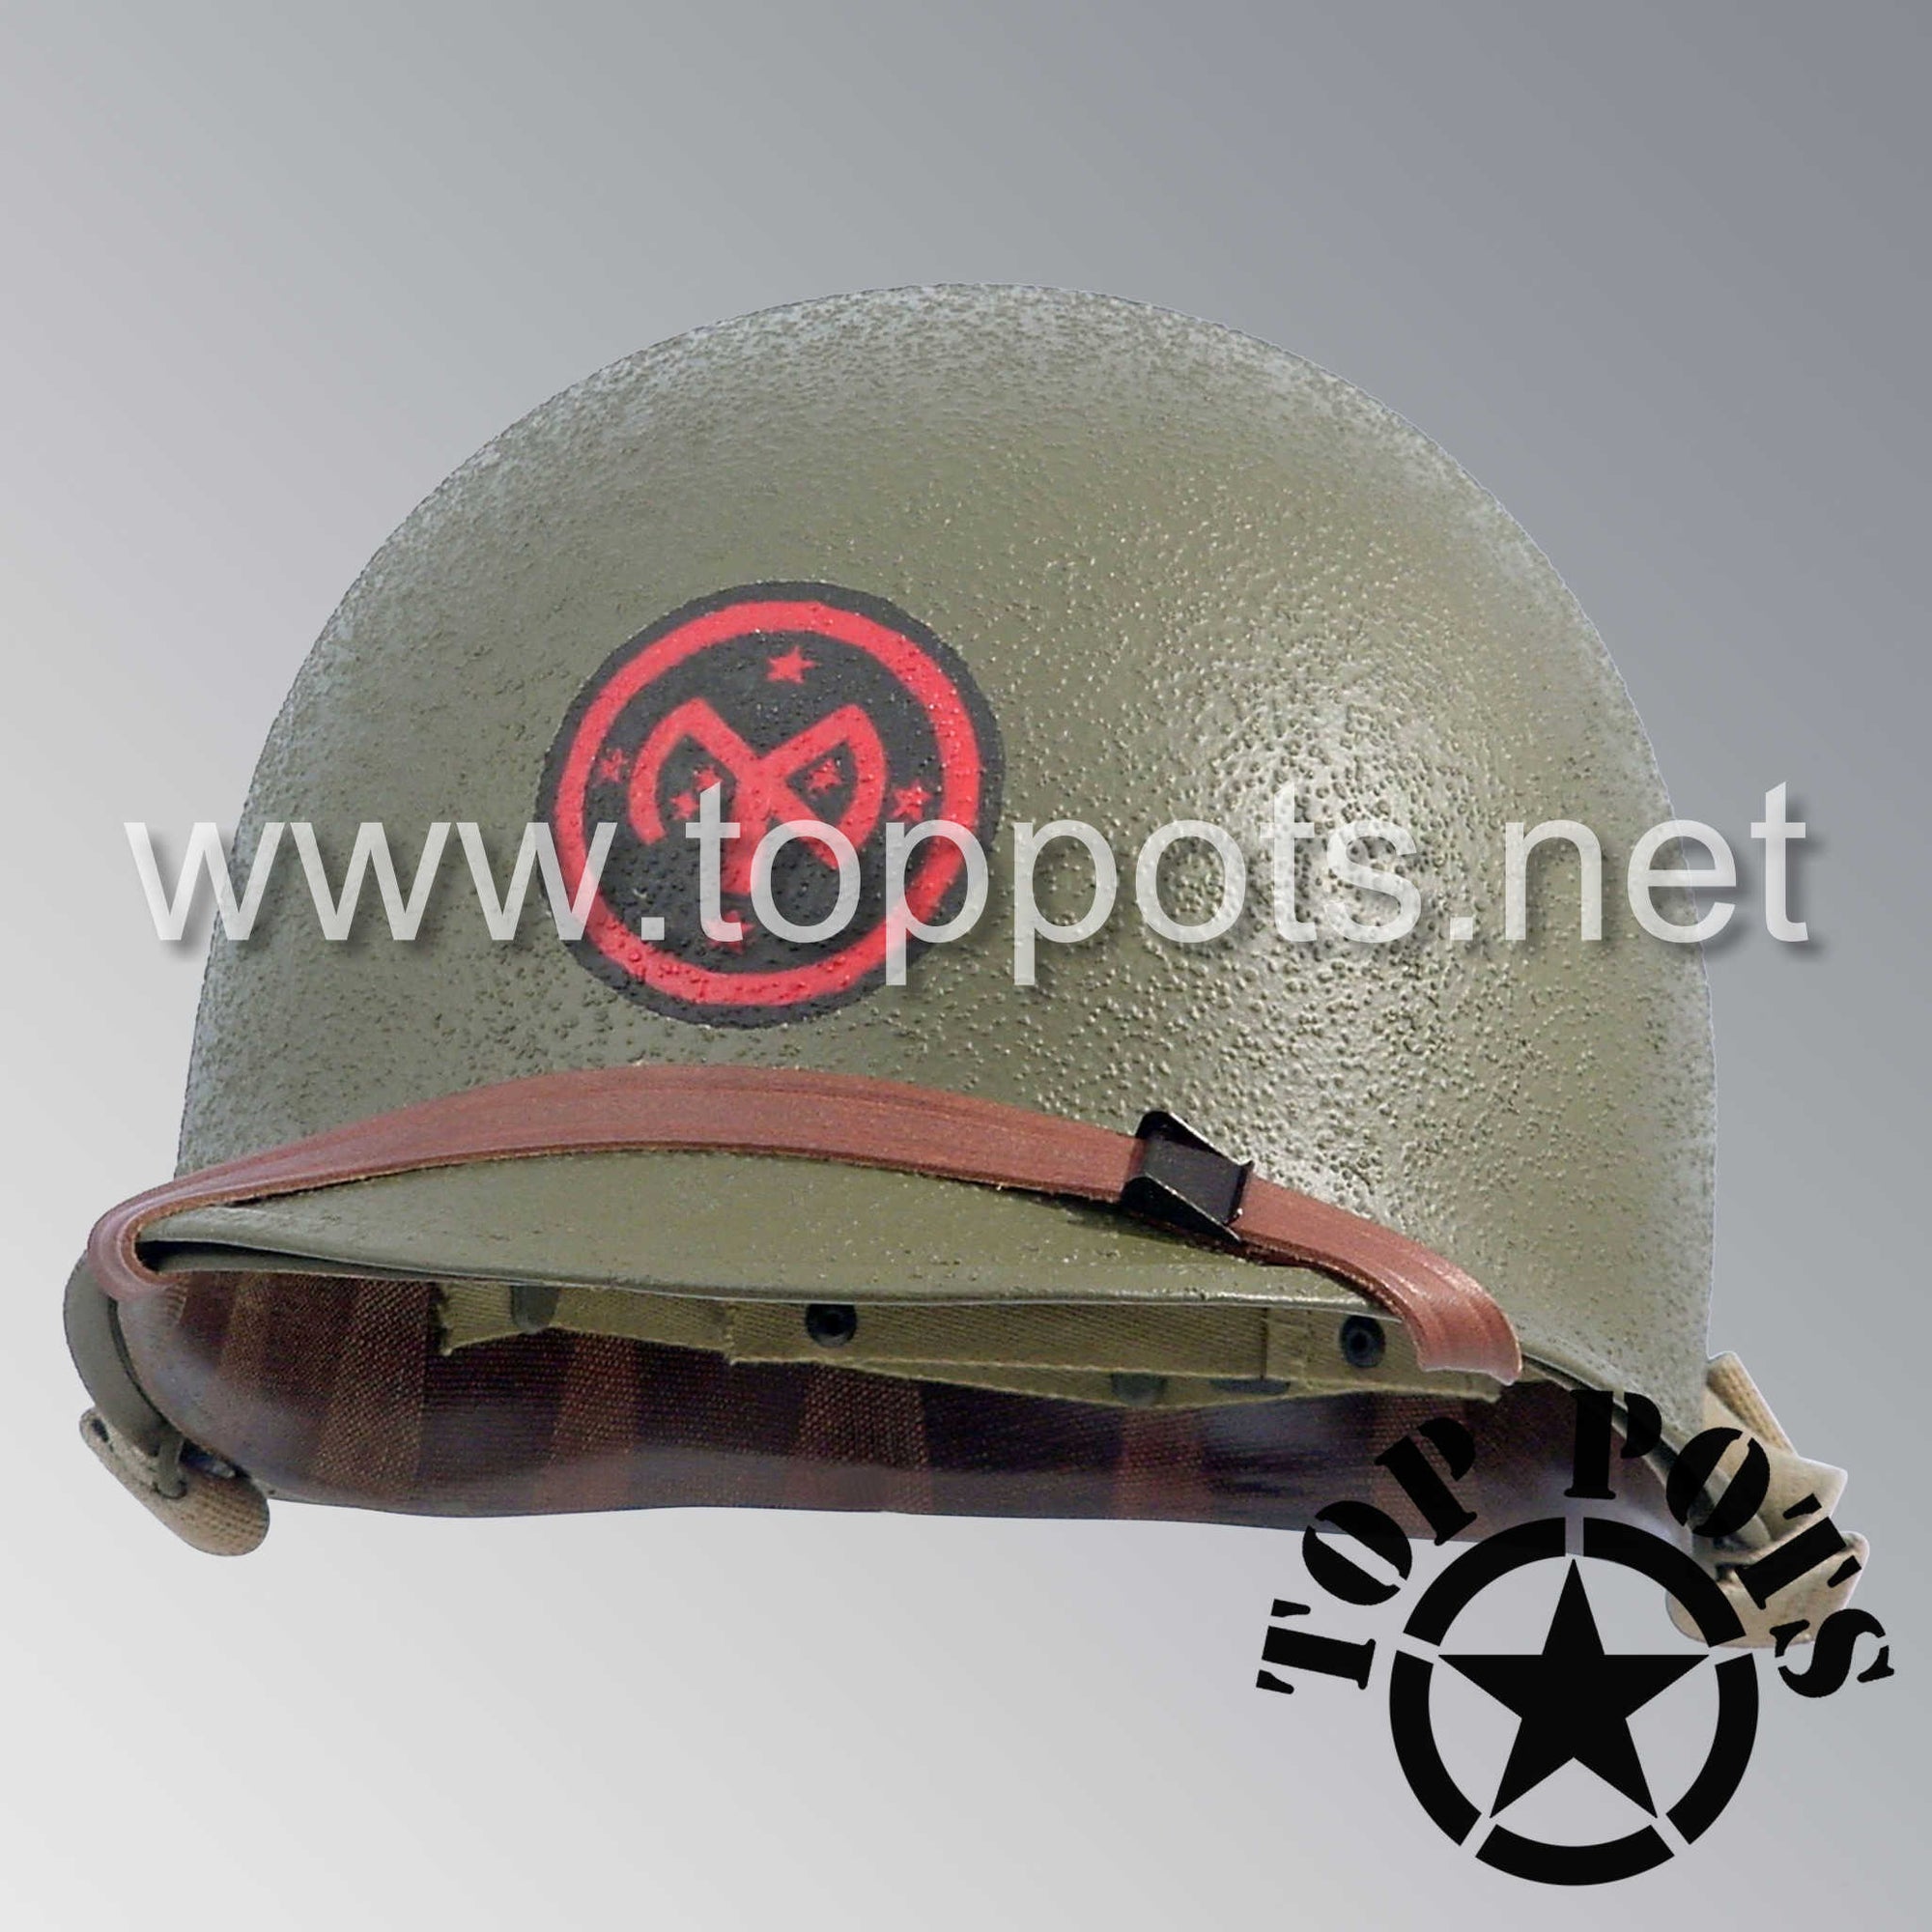 WWII US Army Restored Original M1 Infantry Helmet Swivel Bale Shell and Liner with 27th Infantry Division Emblem